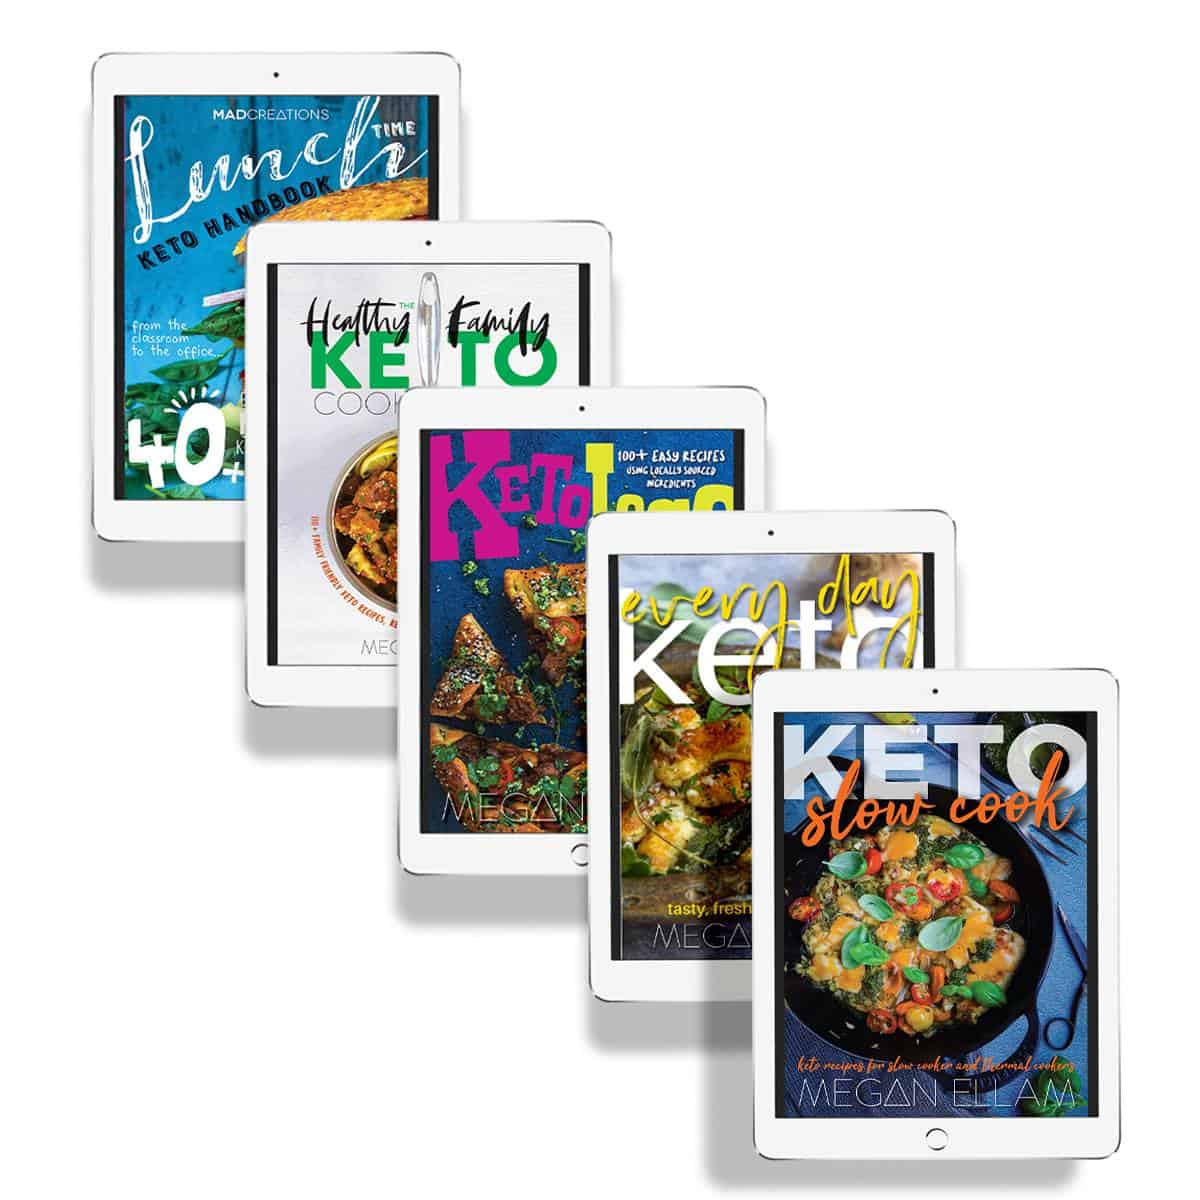 MAD Keto eBook Collection ipad covers.